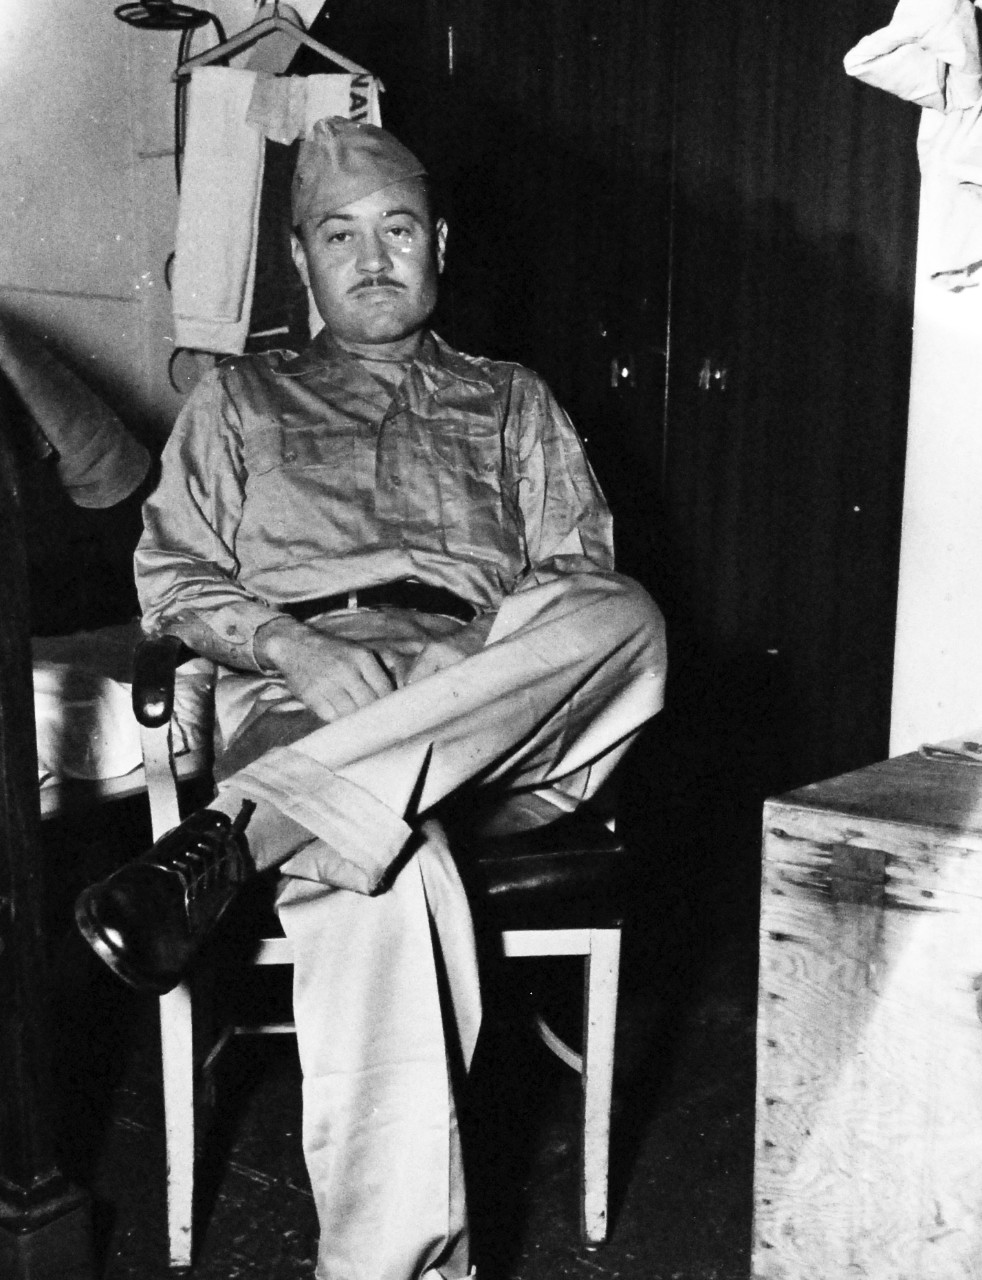 80-G-344571:  Allied Prisoners of War, 1945.  Major Gregory “Pappy” Boyington, USMC, who was reported killed in China and was held as a Prisoner of War by the Japanese and complained of severe beatings with baseball bats and slugging on various occasions.   Boyington later received the Medal of Honor for his aviation achievements prior to be taken prisoner.  Photograph release September 24, 1945.  Official U.S. Navy photograph, now in the collections of the National Archives.   (2015/11/24).